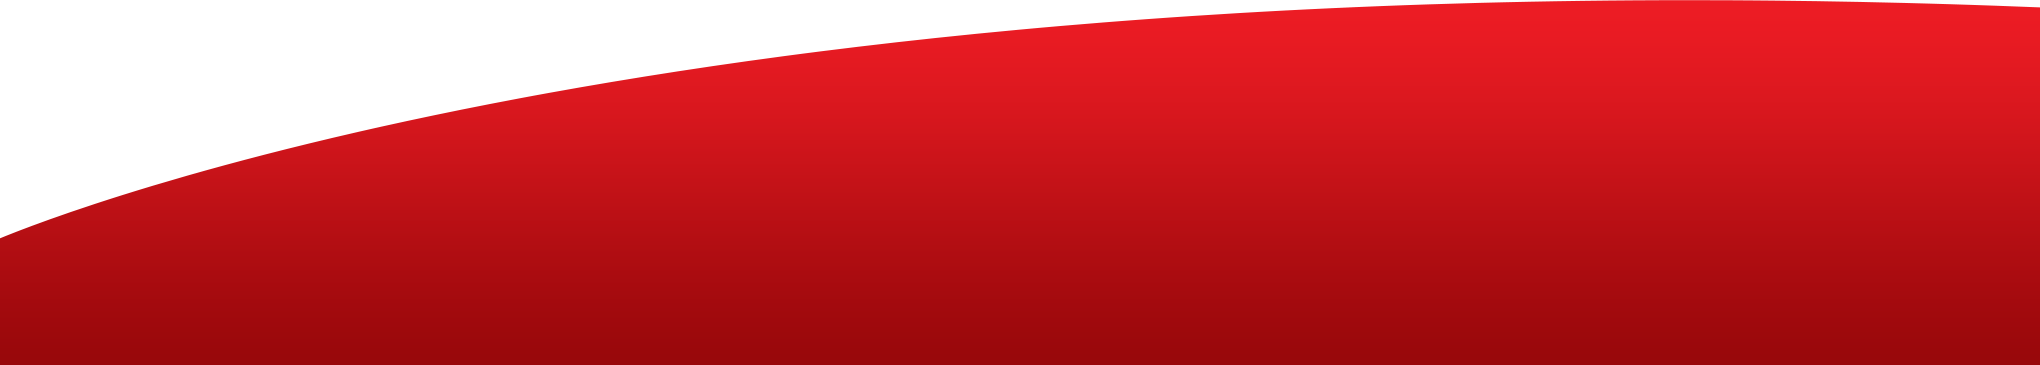 Red curved background